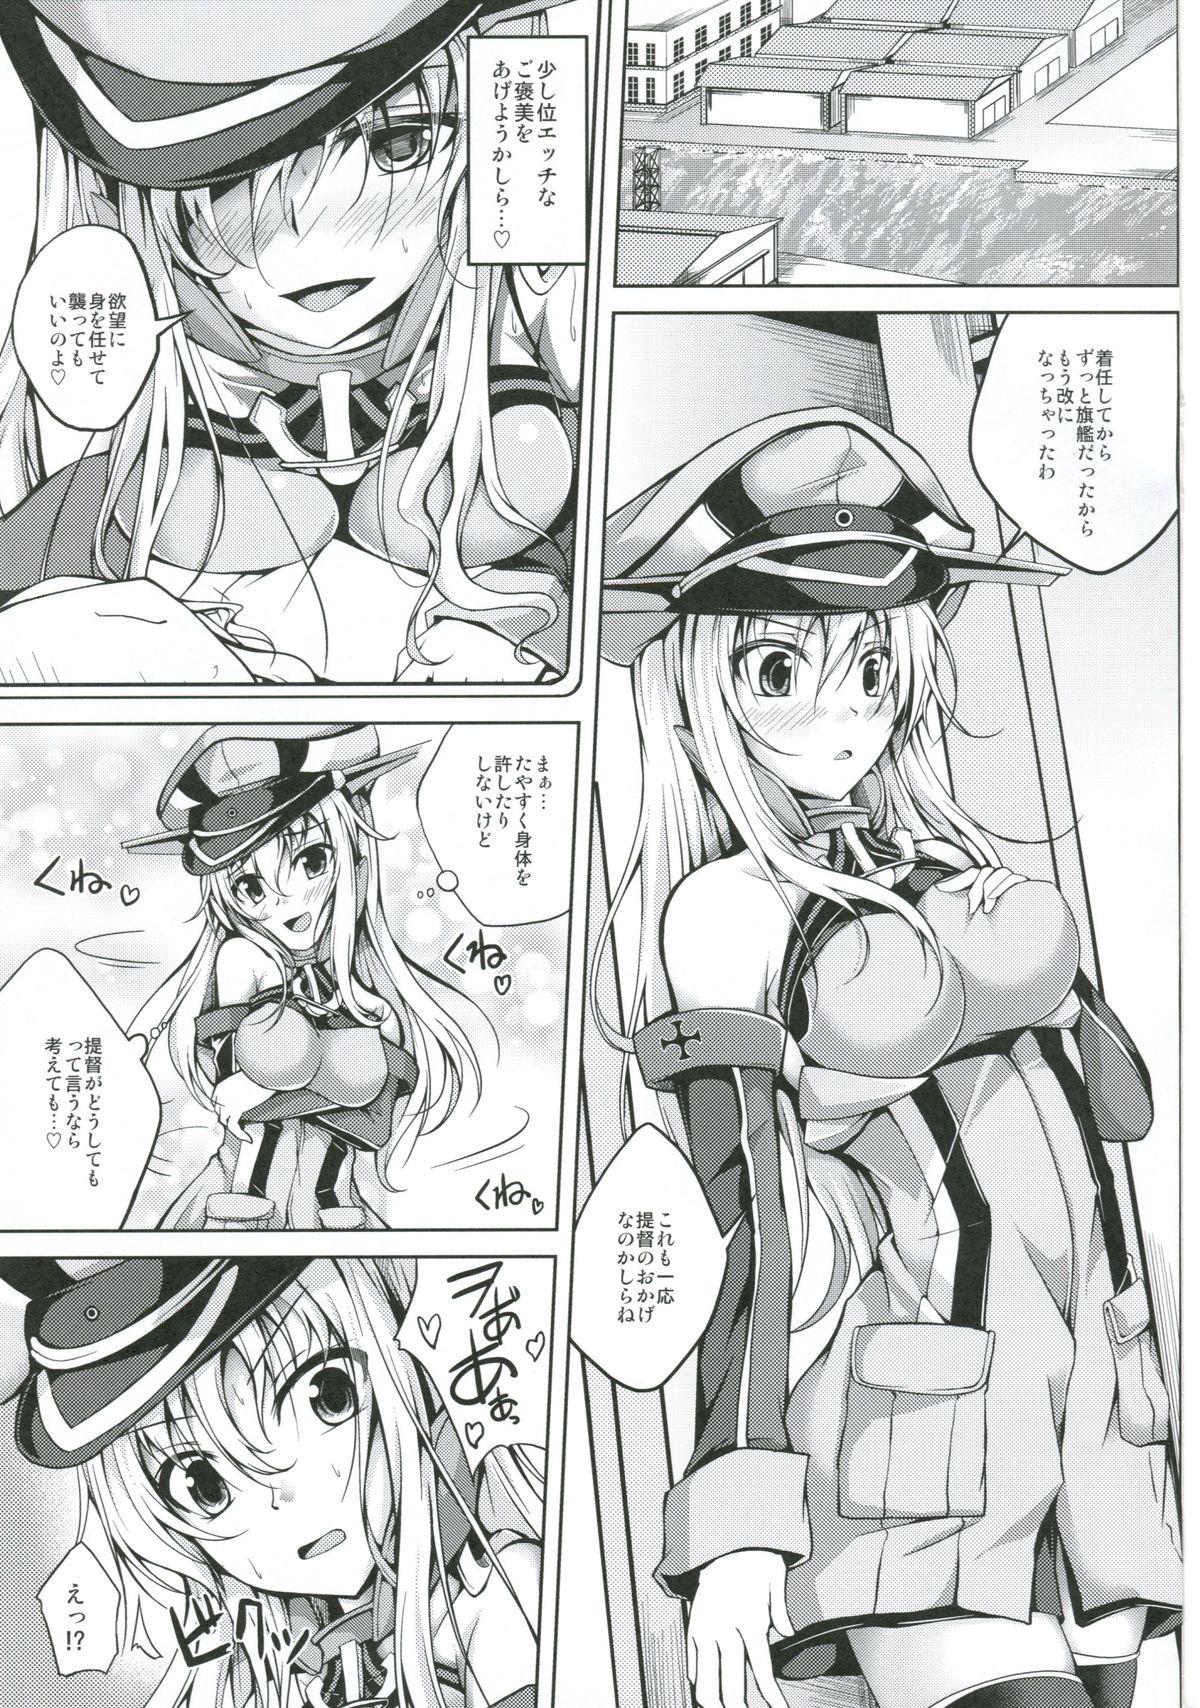 Best Blowjobs Koiiro Moyou 7 - Kantai collection Amateur Sex - Page 2